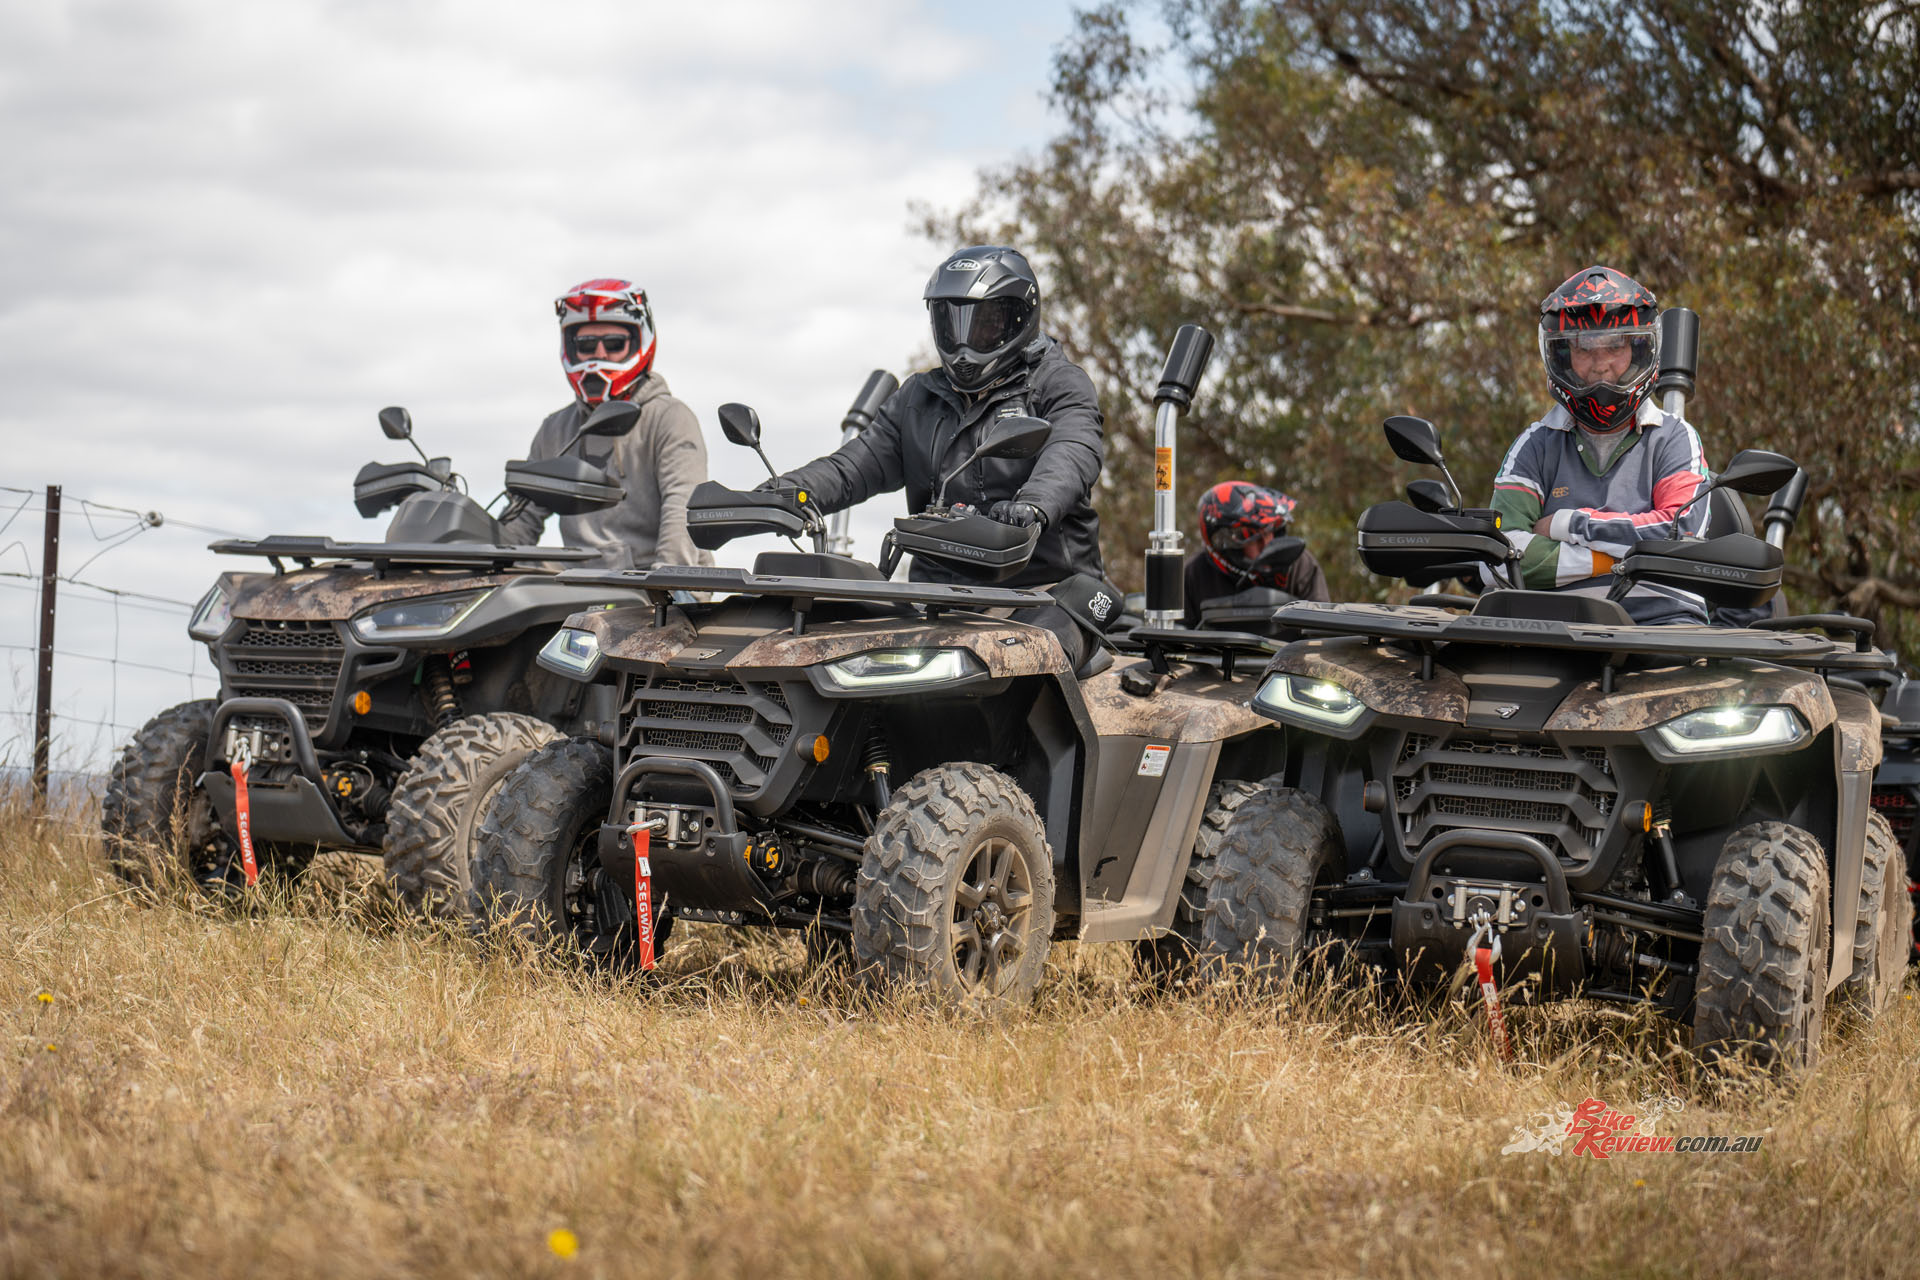 With nine quadbike models and five UTV vehicles in the Segway Powersports lineup, there is plenty of choice when it comes to purchasing one. Dan headed out to Seven Hills to get dusty and test the lot!